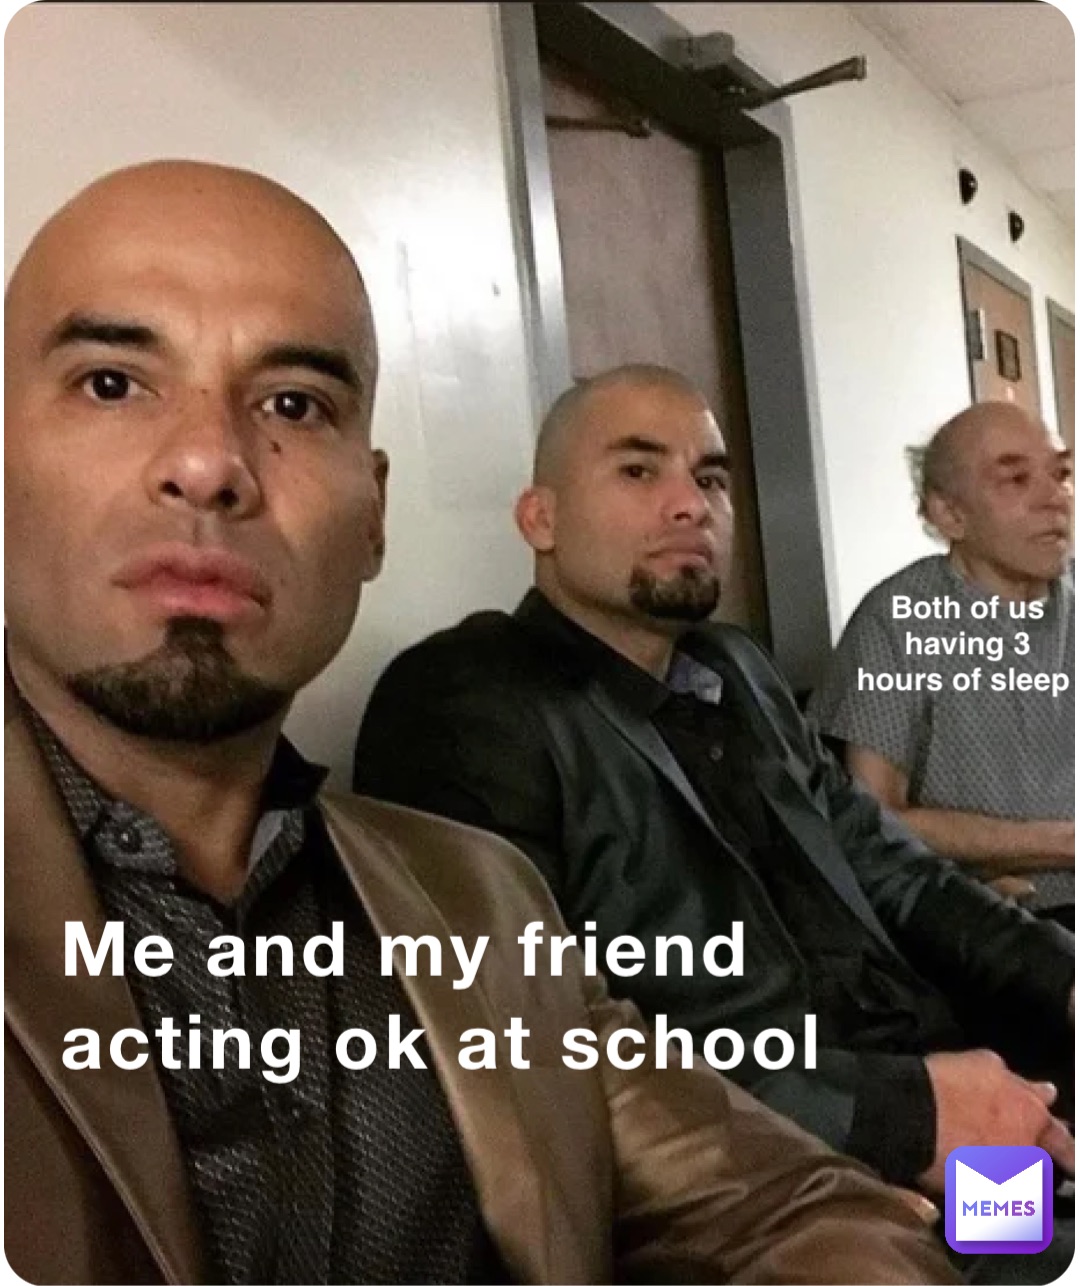 Me and my friend acting ok at school Both of us having 3 hours of sleep